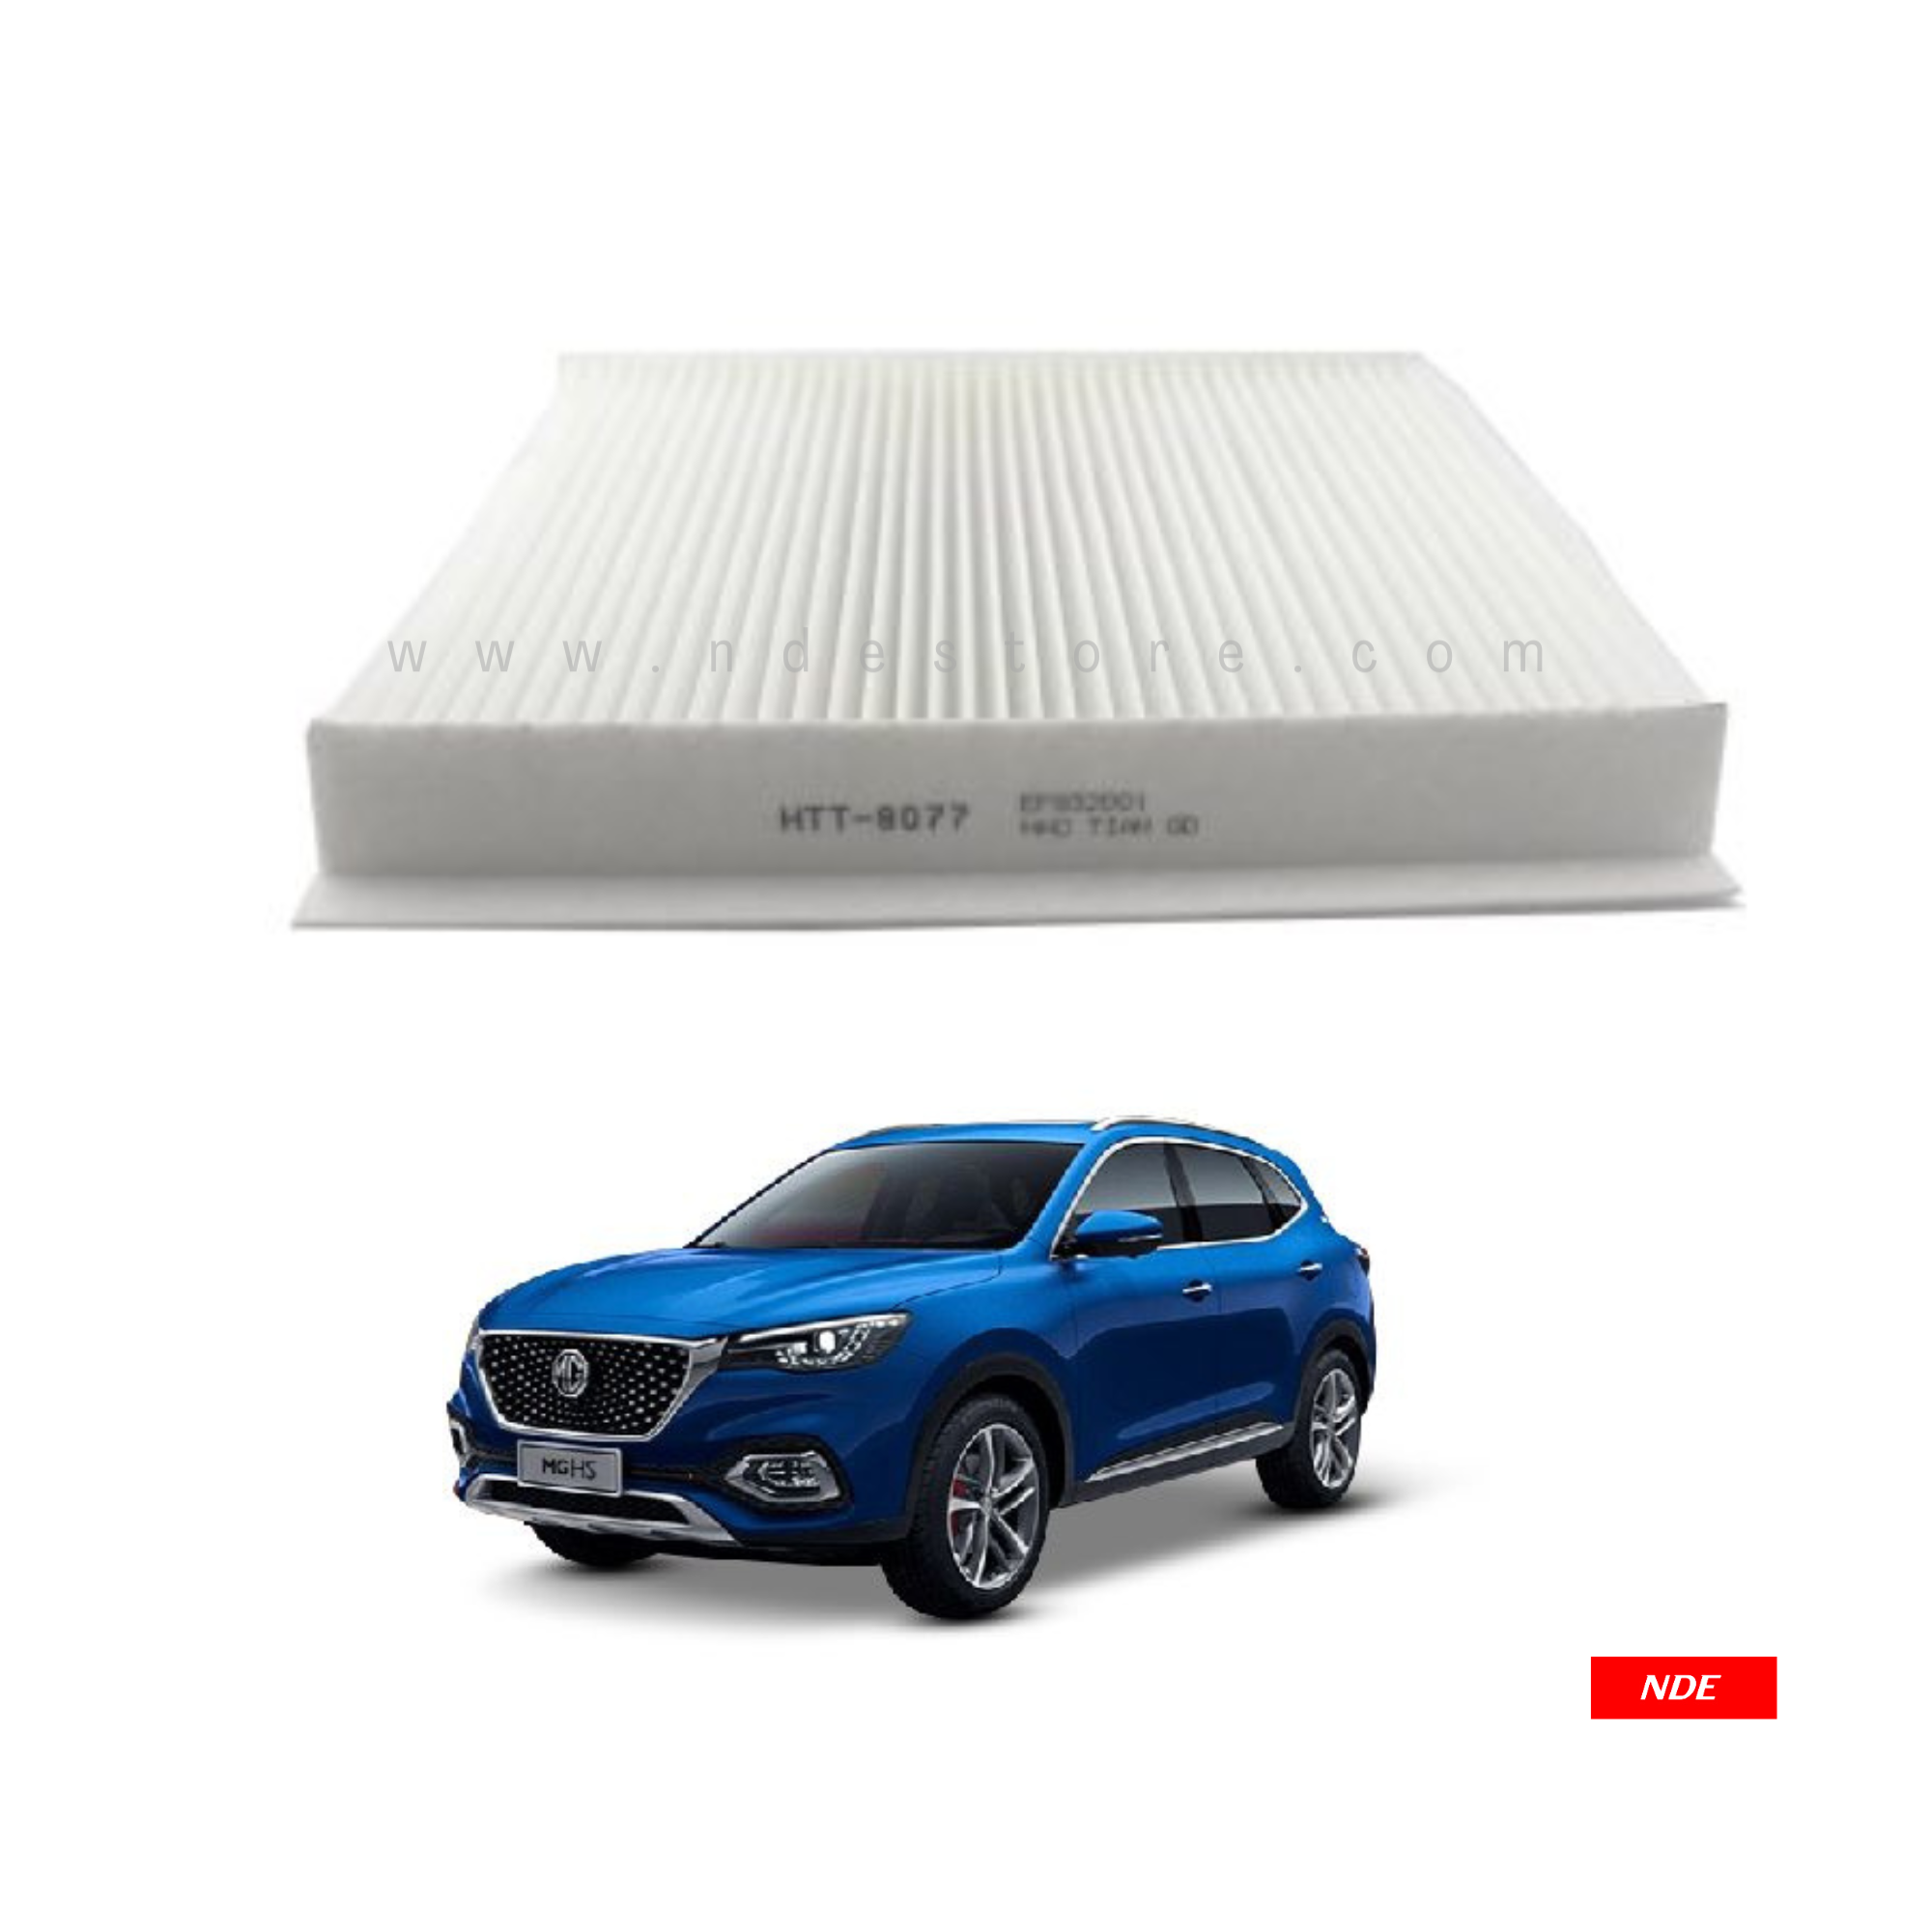 CABIN AIR FILTER, GENUINE FOR MG HS (MG GENUINE PART)